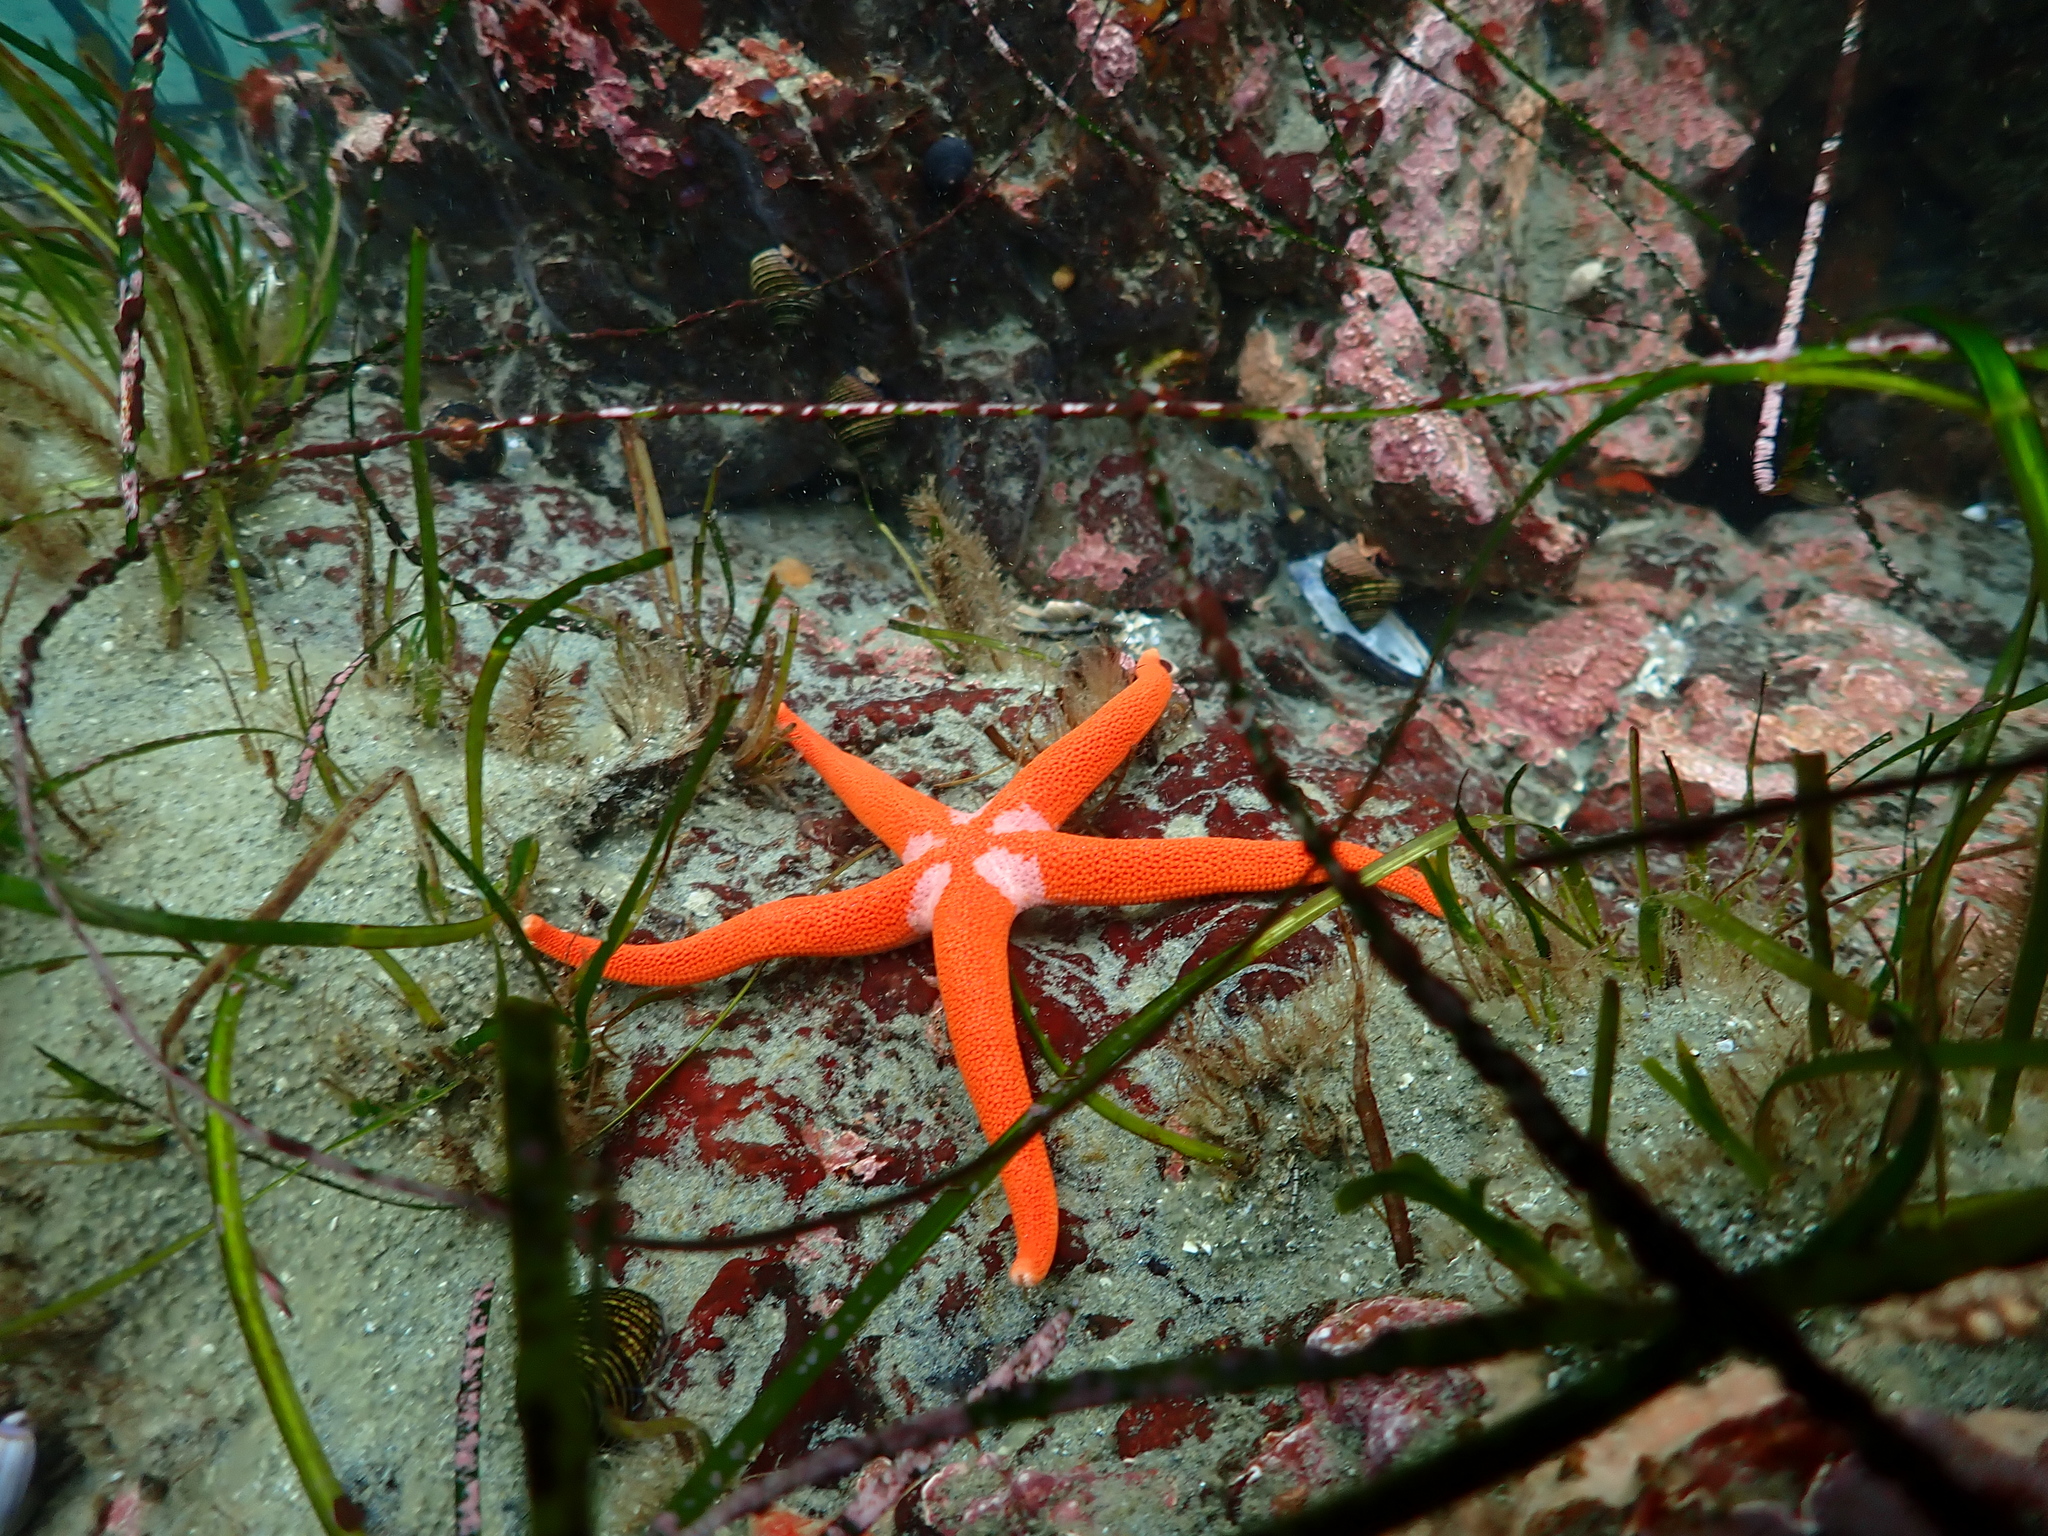 Underwater photograph of a skinny orange sea star with white patches in the center, sitting on the algae-covered sea floor